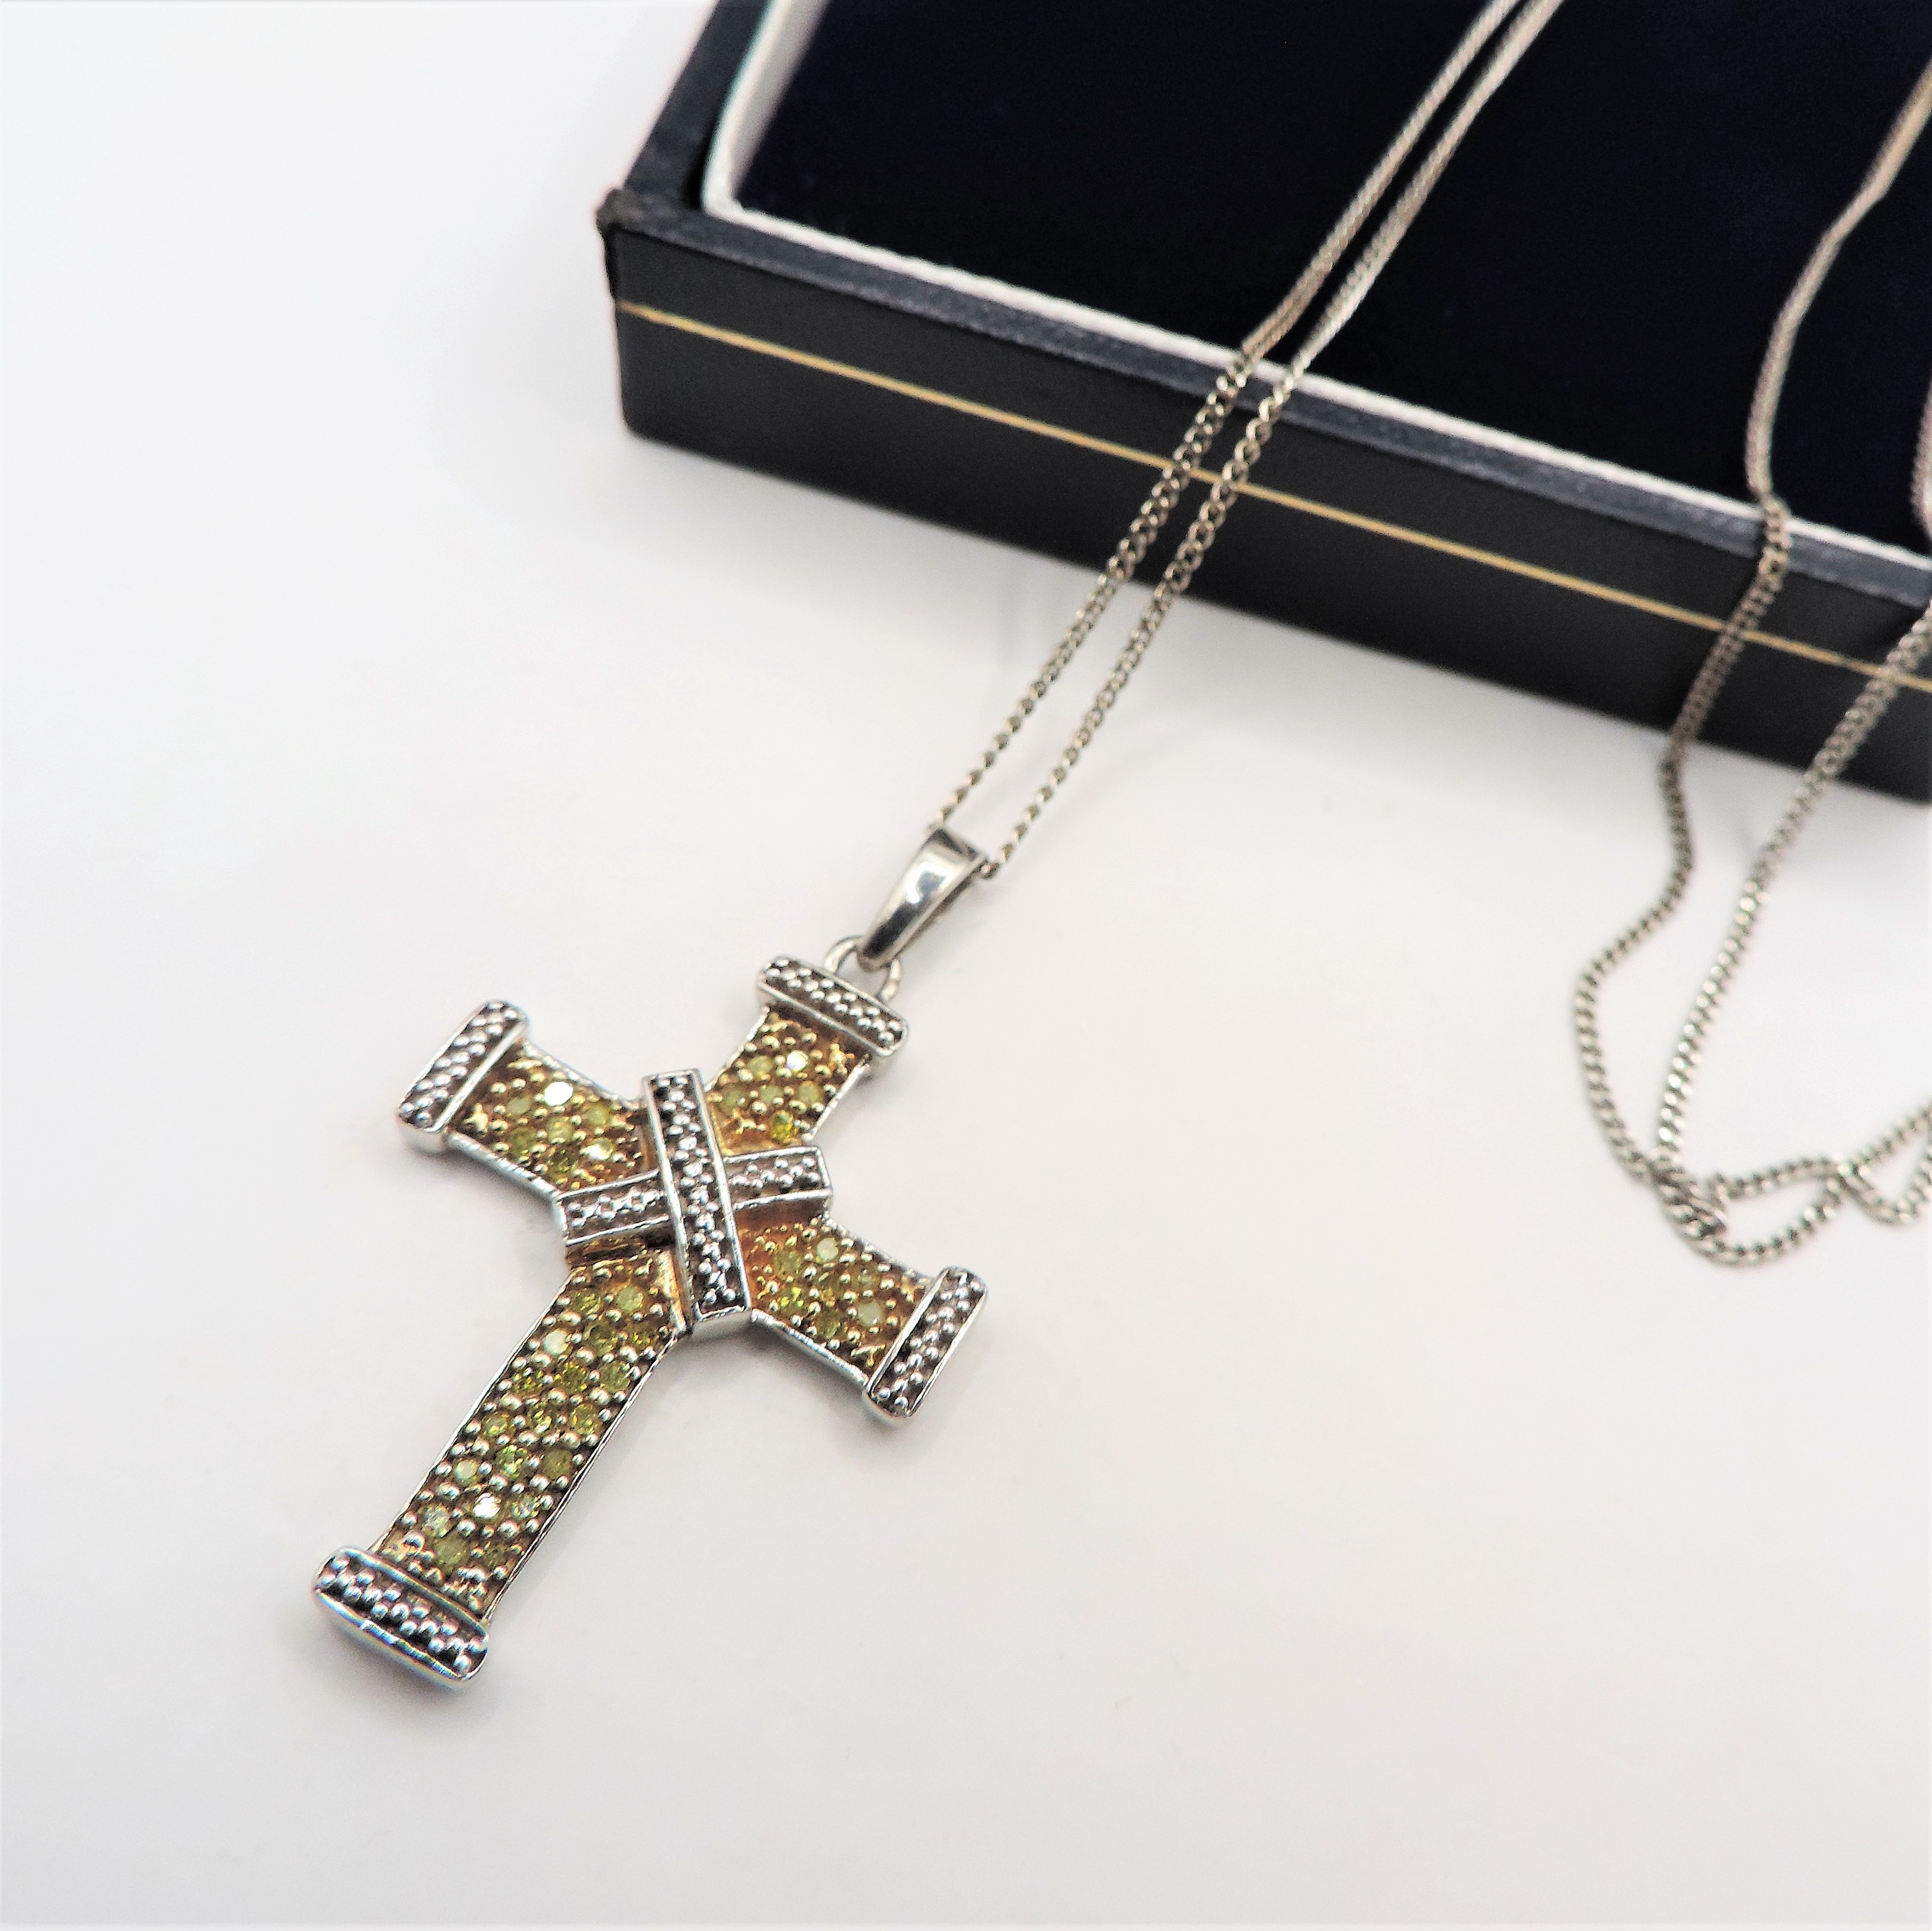 Platinum on Sterling Silver Yellow Diamond Cross Pendant Necklace 'New' with Gift Box - Image 2 of 3